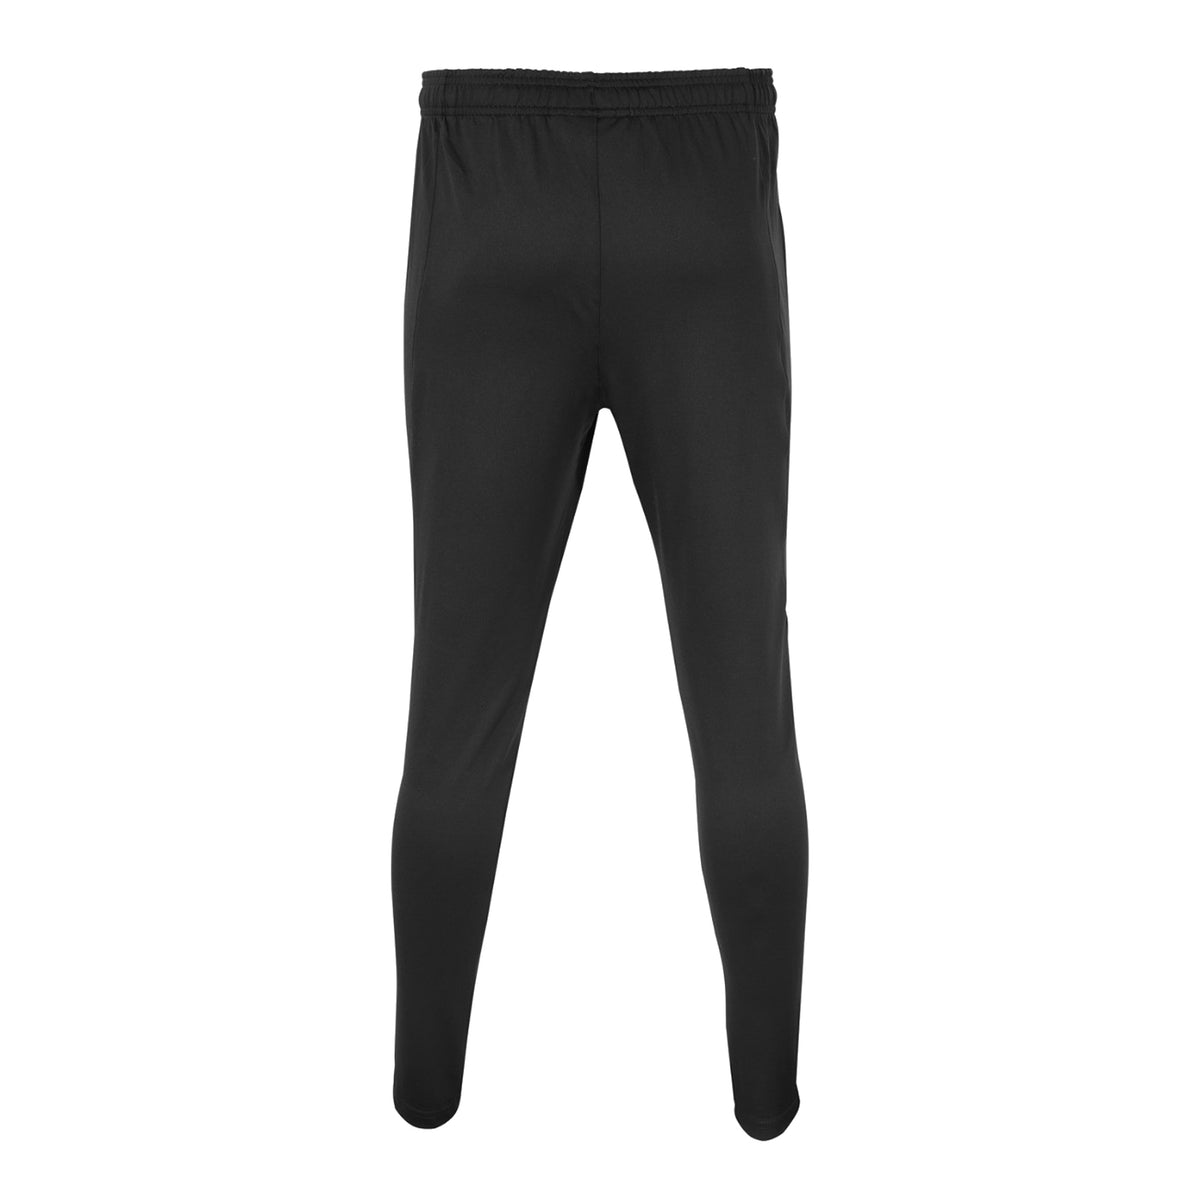 Under Armour Youth Challenger Training Pants: Black